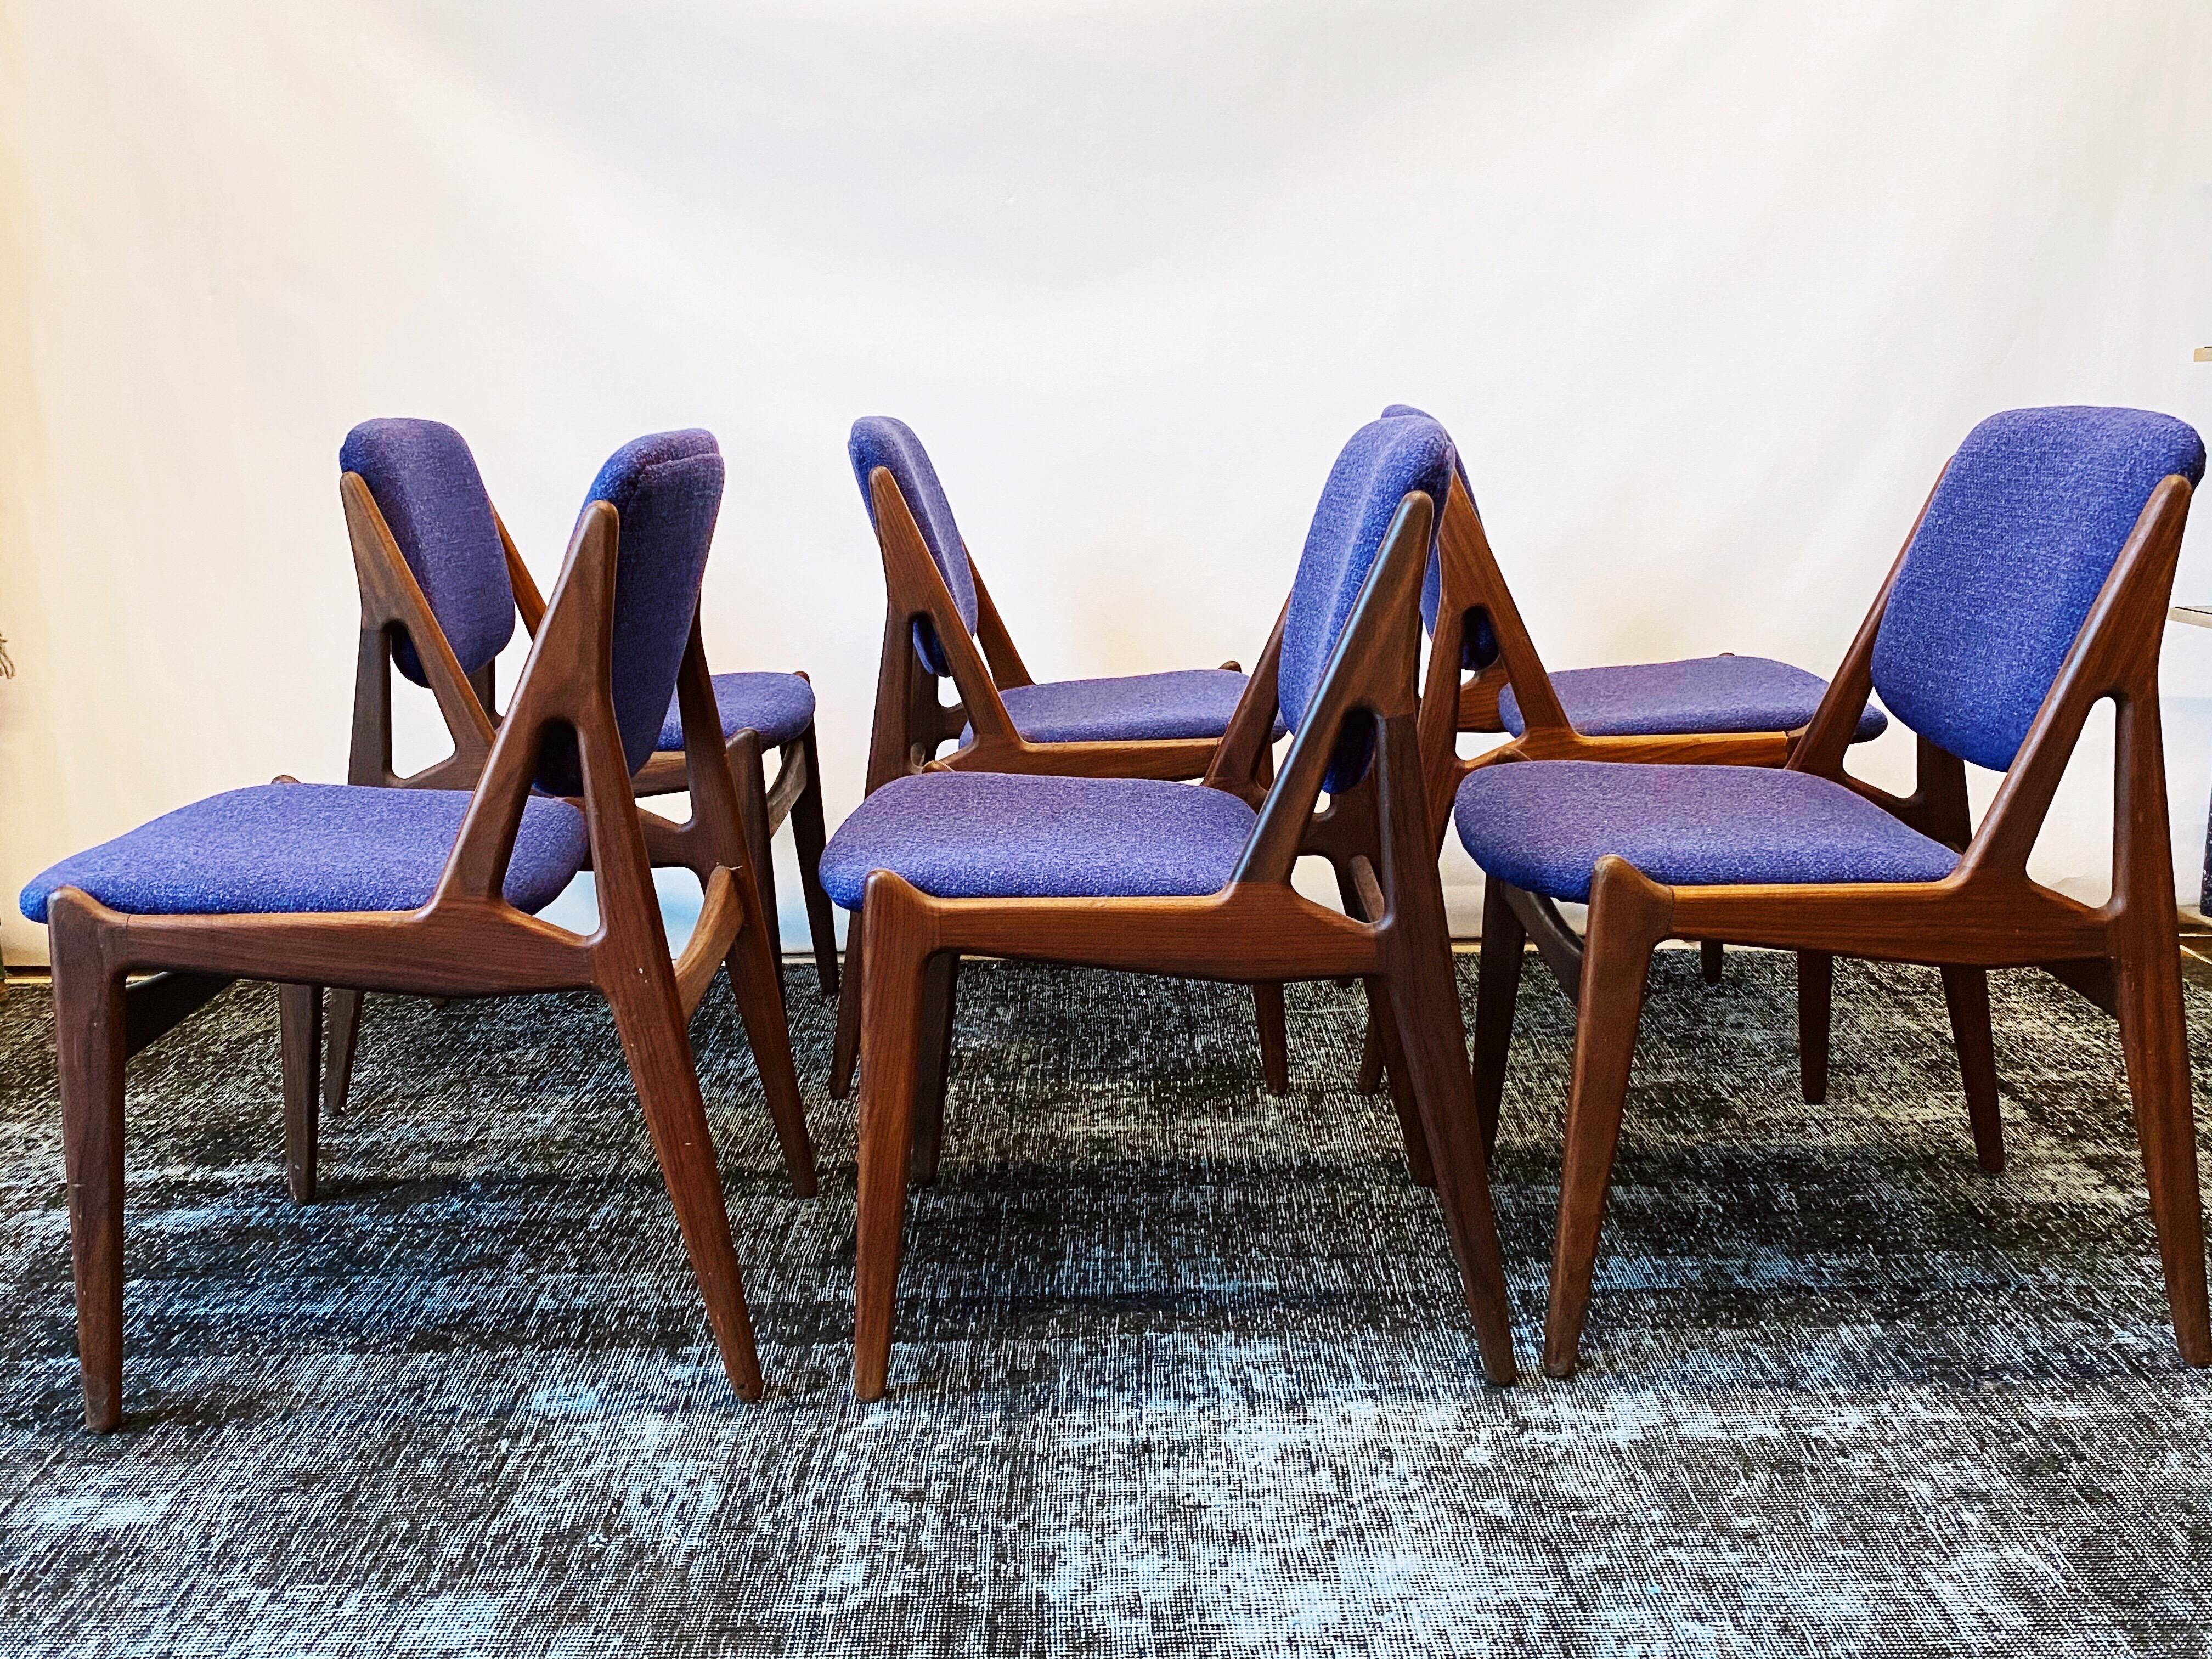 This vintage set of six Danish modern dining chairs by Arne Vodder are in overall good condition. Afromosia frames. New blue and purple wool tweed upholstery and foam. The backs of these chairs pivot for comfort. Shows wear consistent with age and